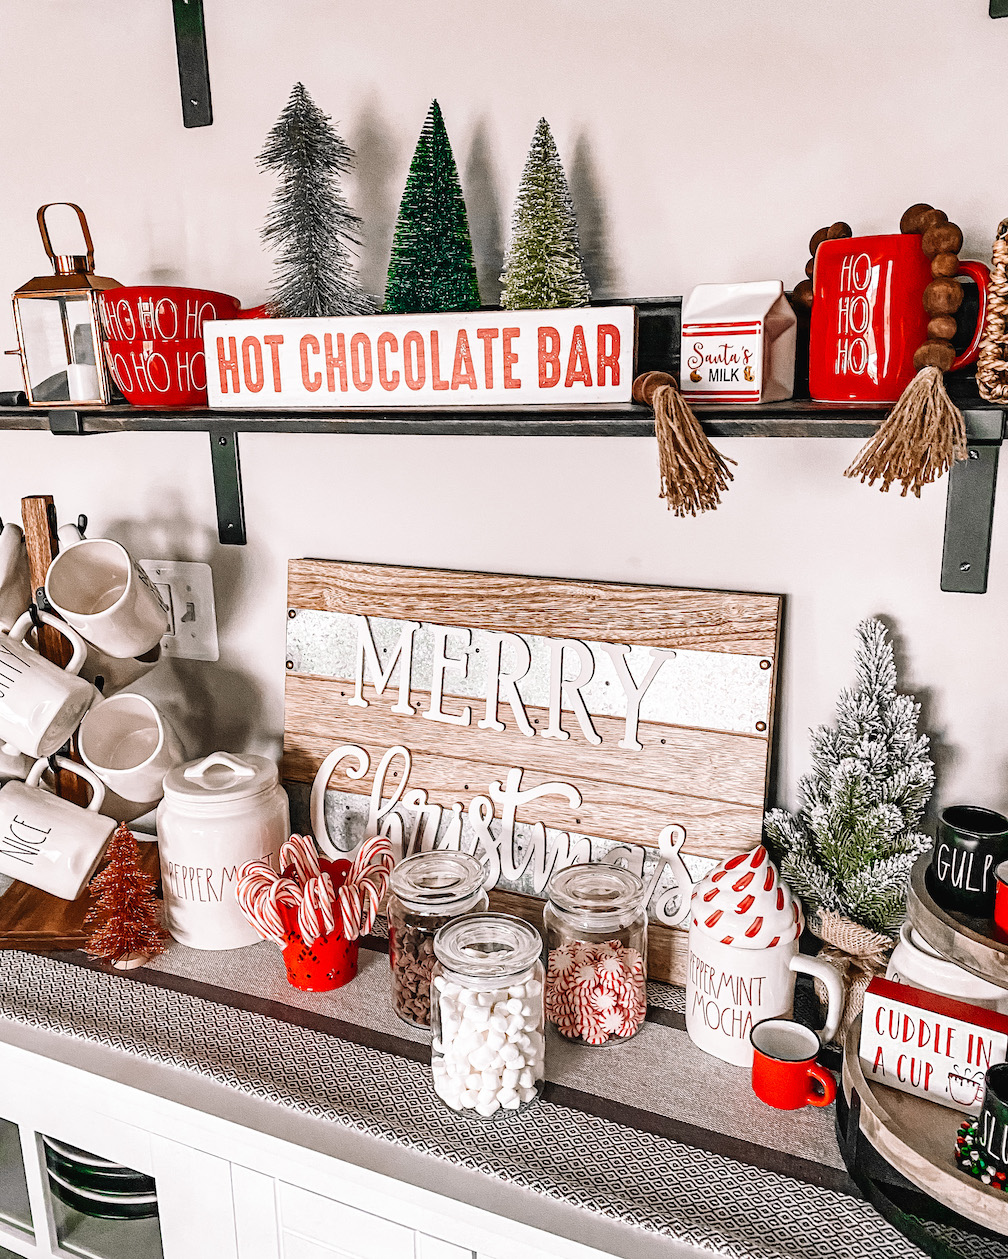 Personalized Hot Chocolate Bar Sign, Hot Cocoa Sign Wall Art